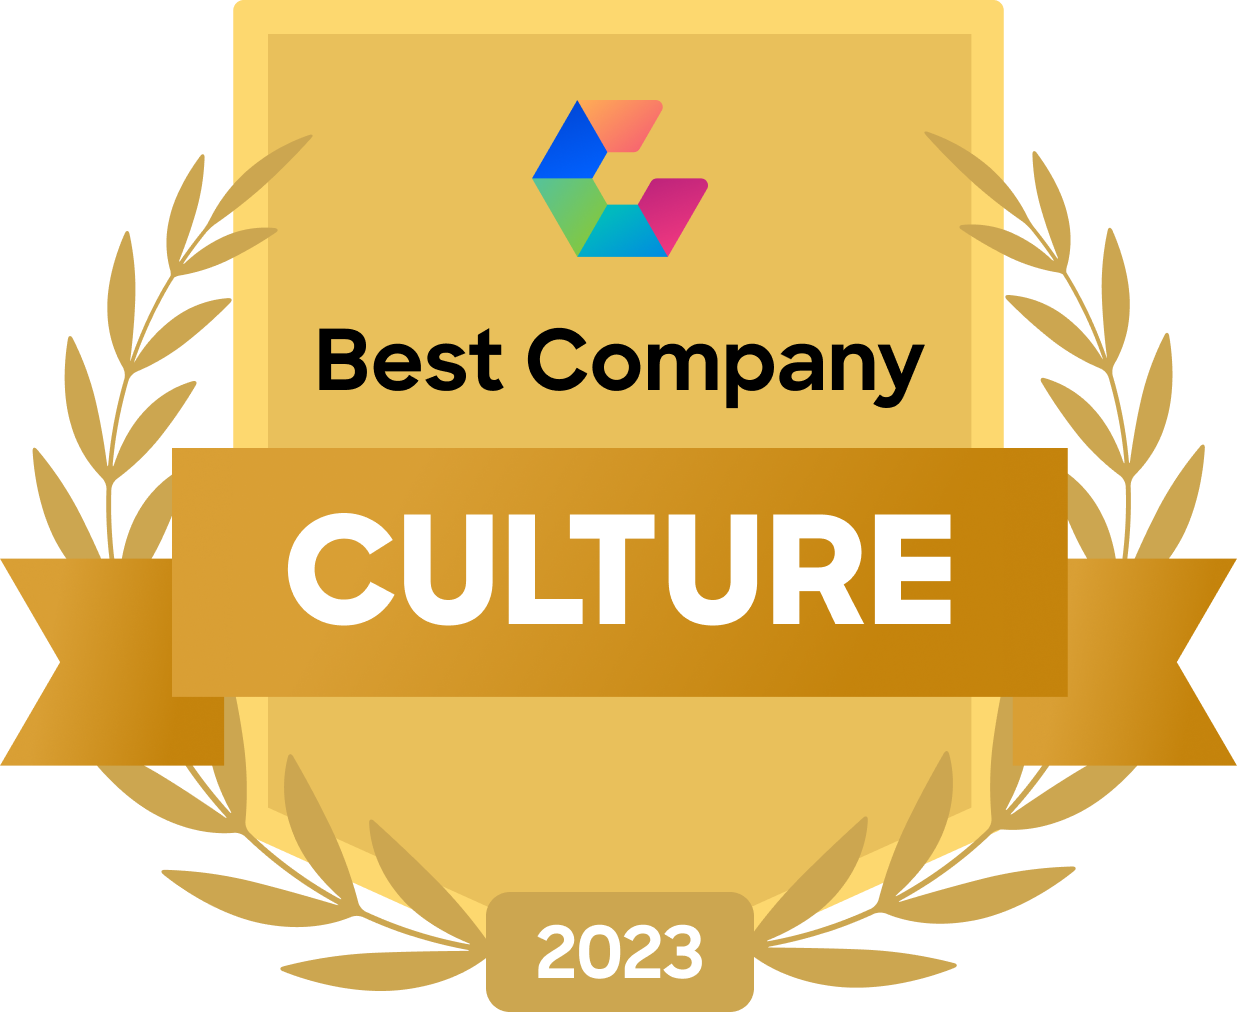 Best Company Culture 2023